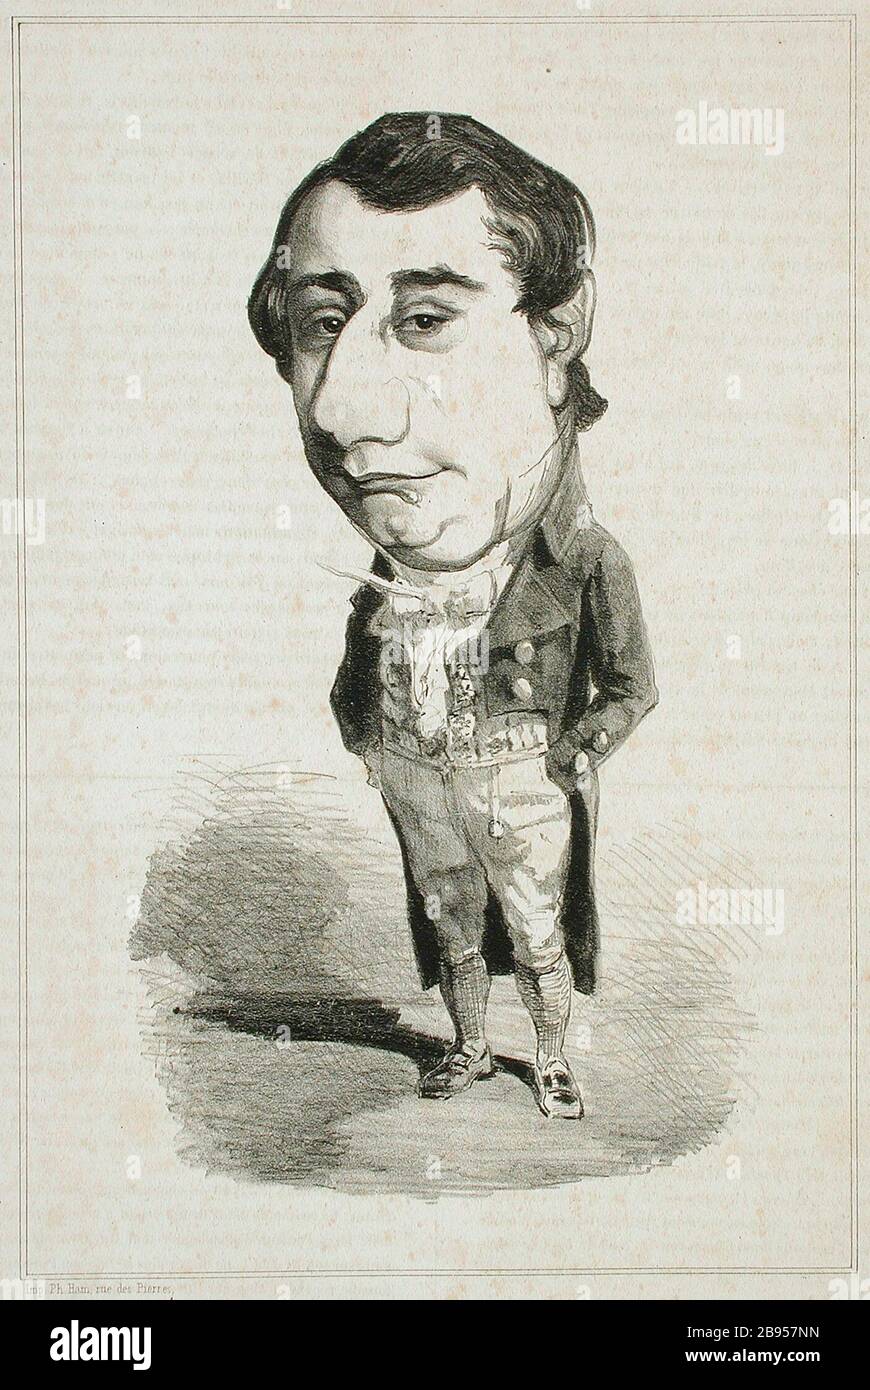 'Victor Prilleux; English:  Belgium, 1856 Periodical: Uylenspiegel, no. 8, 23 March 1856 Prints; lithographs Lithograph 8 7/8 x 5 15/16 in. (22.54 x 15.08 cm) Gift of Michael G. Wilson (M.80.277.11) Prints and Drawings; 1856date QS:P571,+1856-00-00T00:00:00Z/9; ' Stock Photo